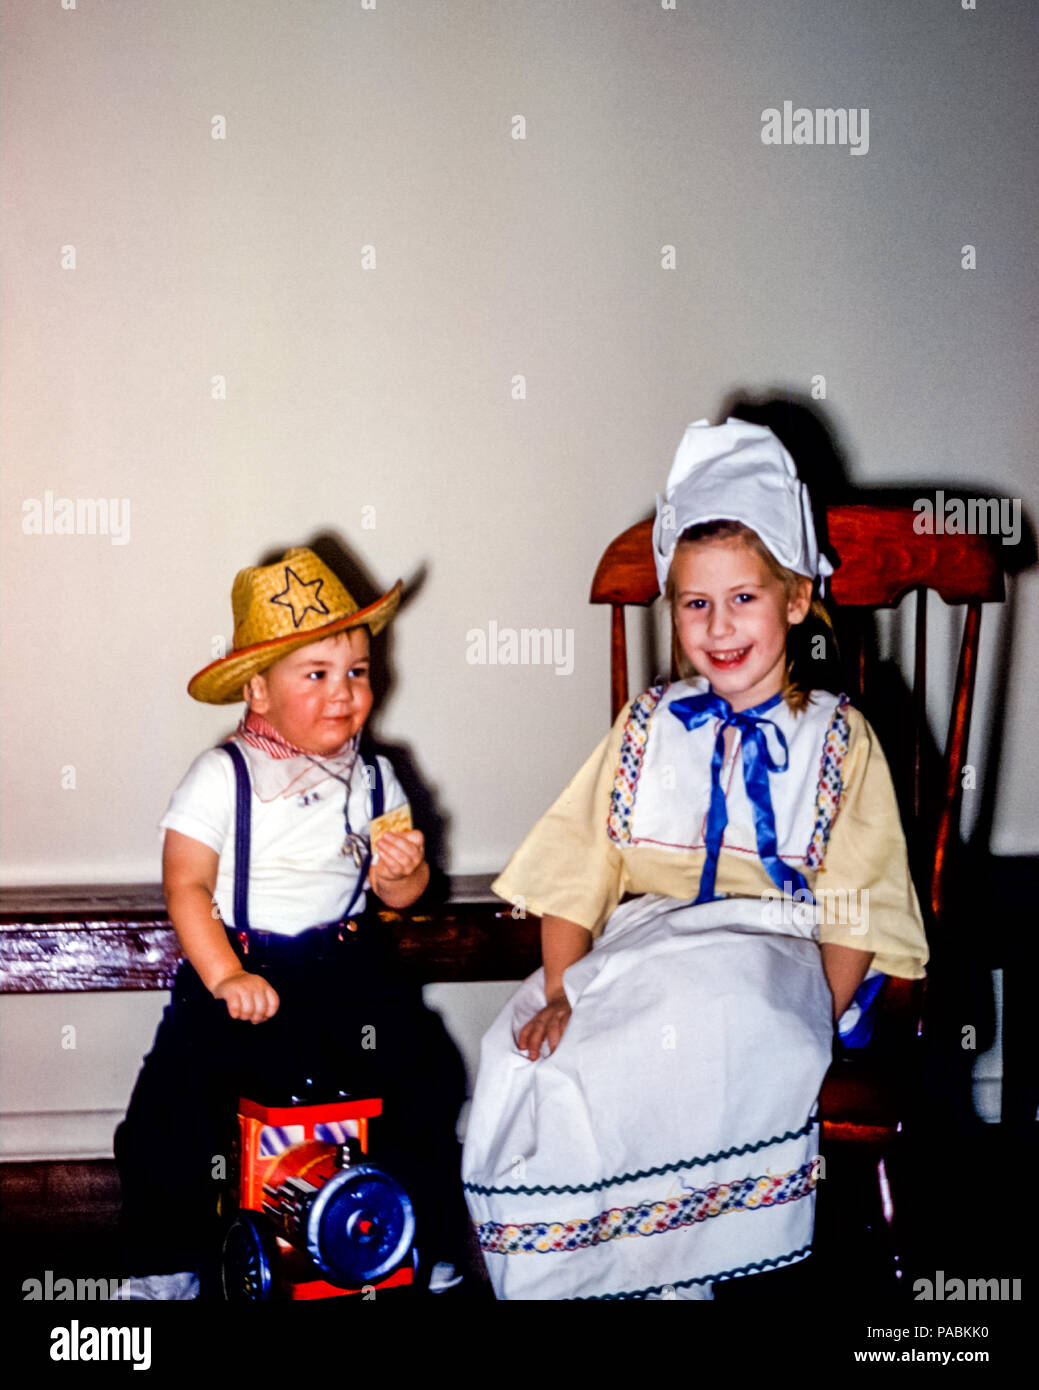 Young children in fancy dress costume for Halloween in USA in the 1950s.  The little four year old girl is wearing a traditional Dutch dress costume and the little boy is wearing a cowboy hat and kerchief sitting on a toy engine Stock Photo